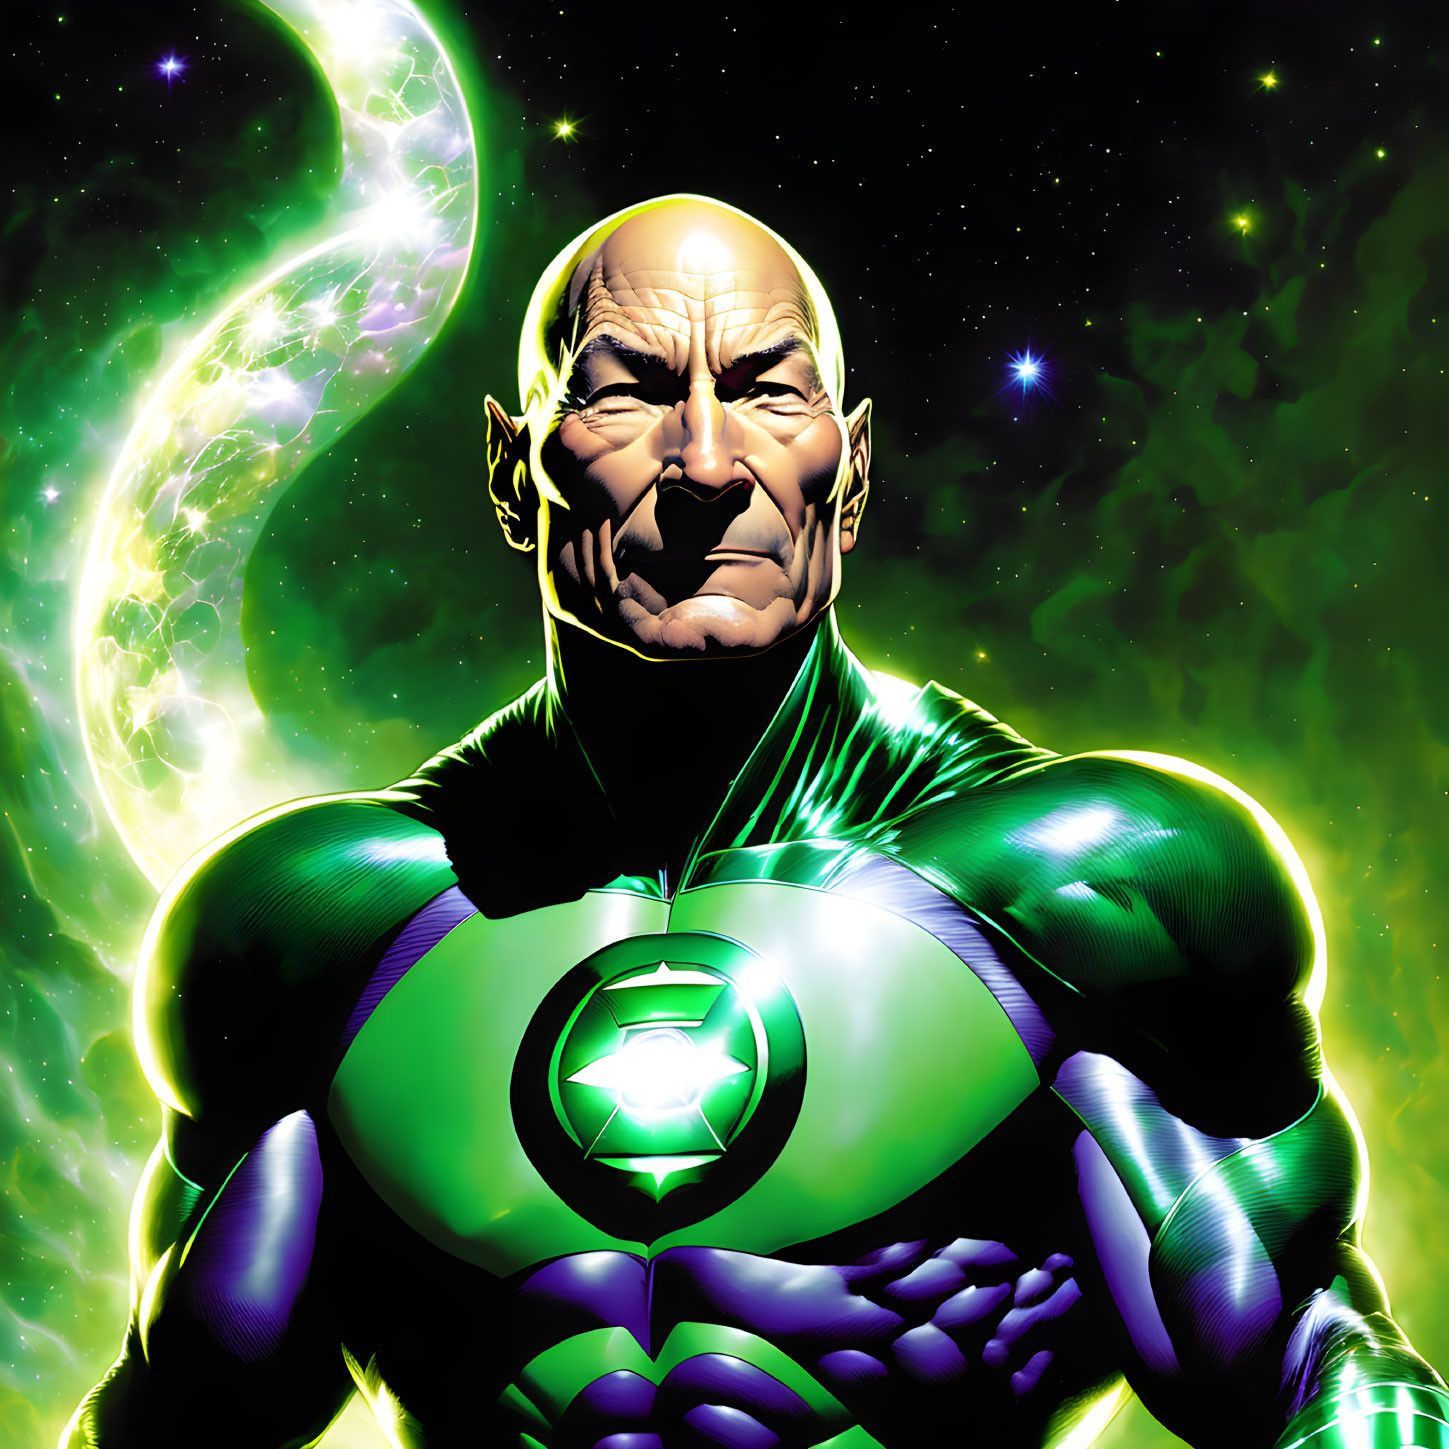 Bald Superhero in Green and Black Suit with Lantern Emblem Standing Confidently